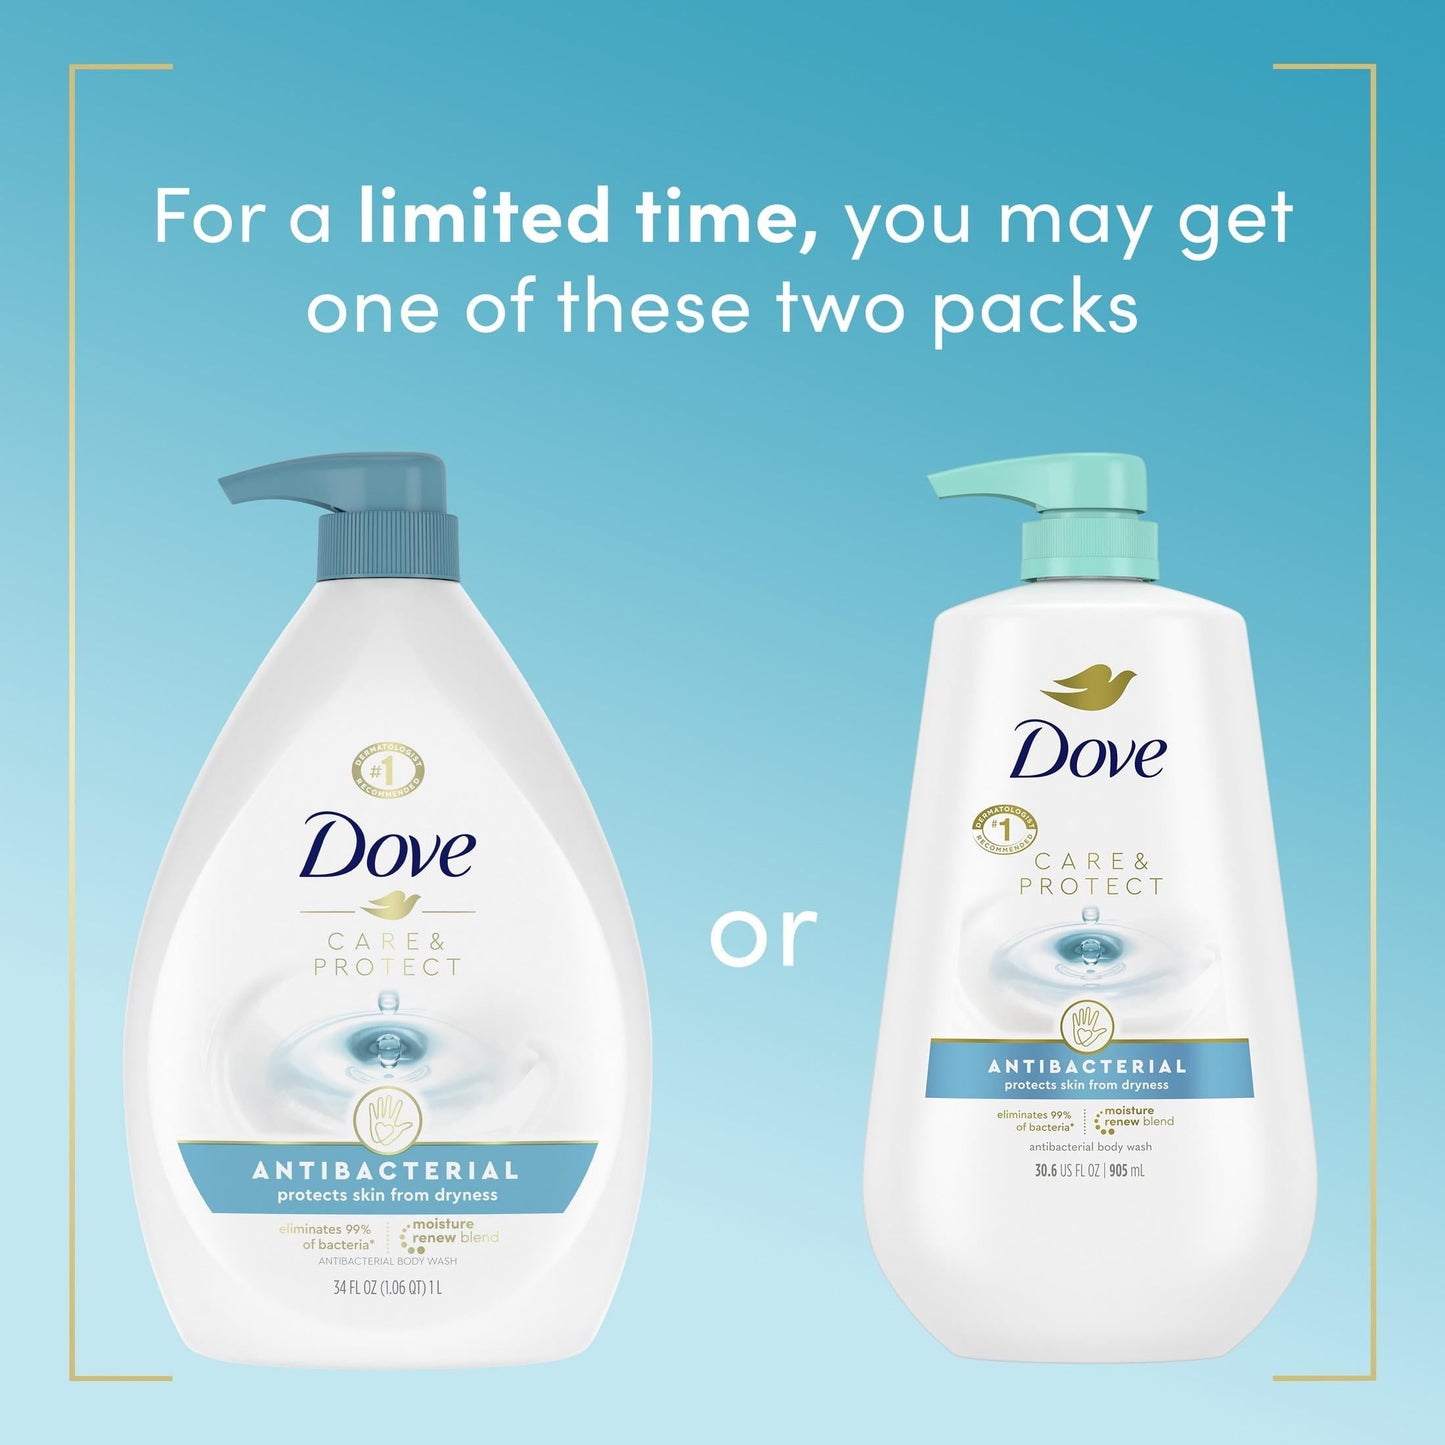 Dove Care and Protect Daily Use Antibacterial Hand Soap, 34 fl oz